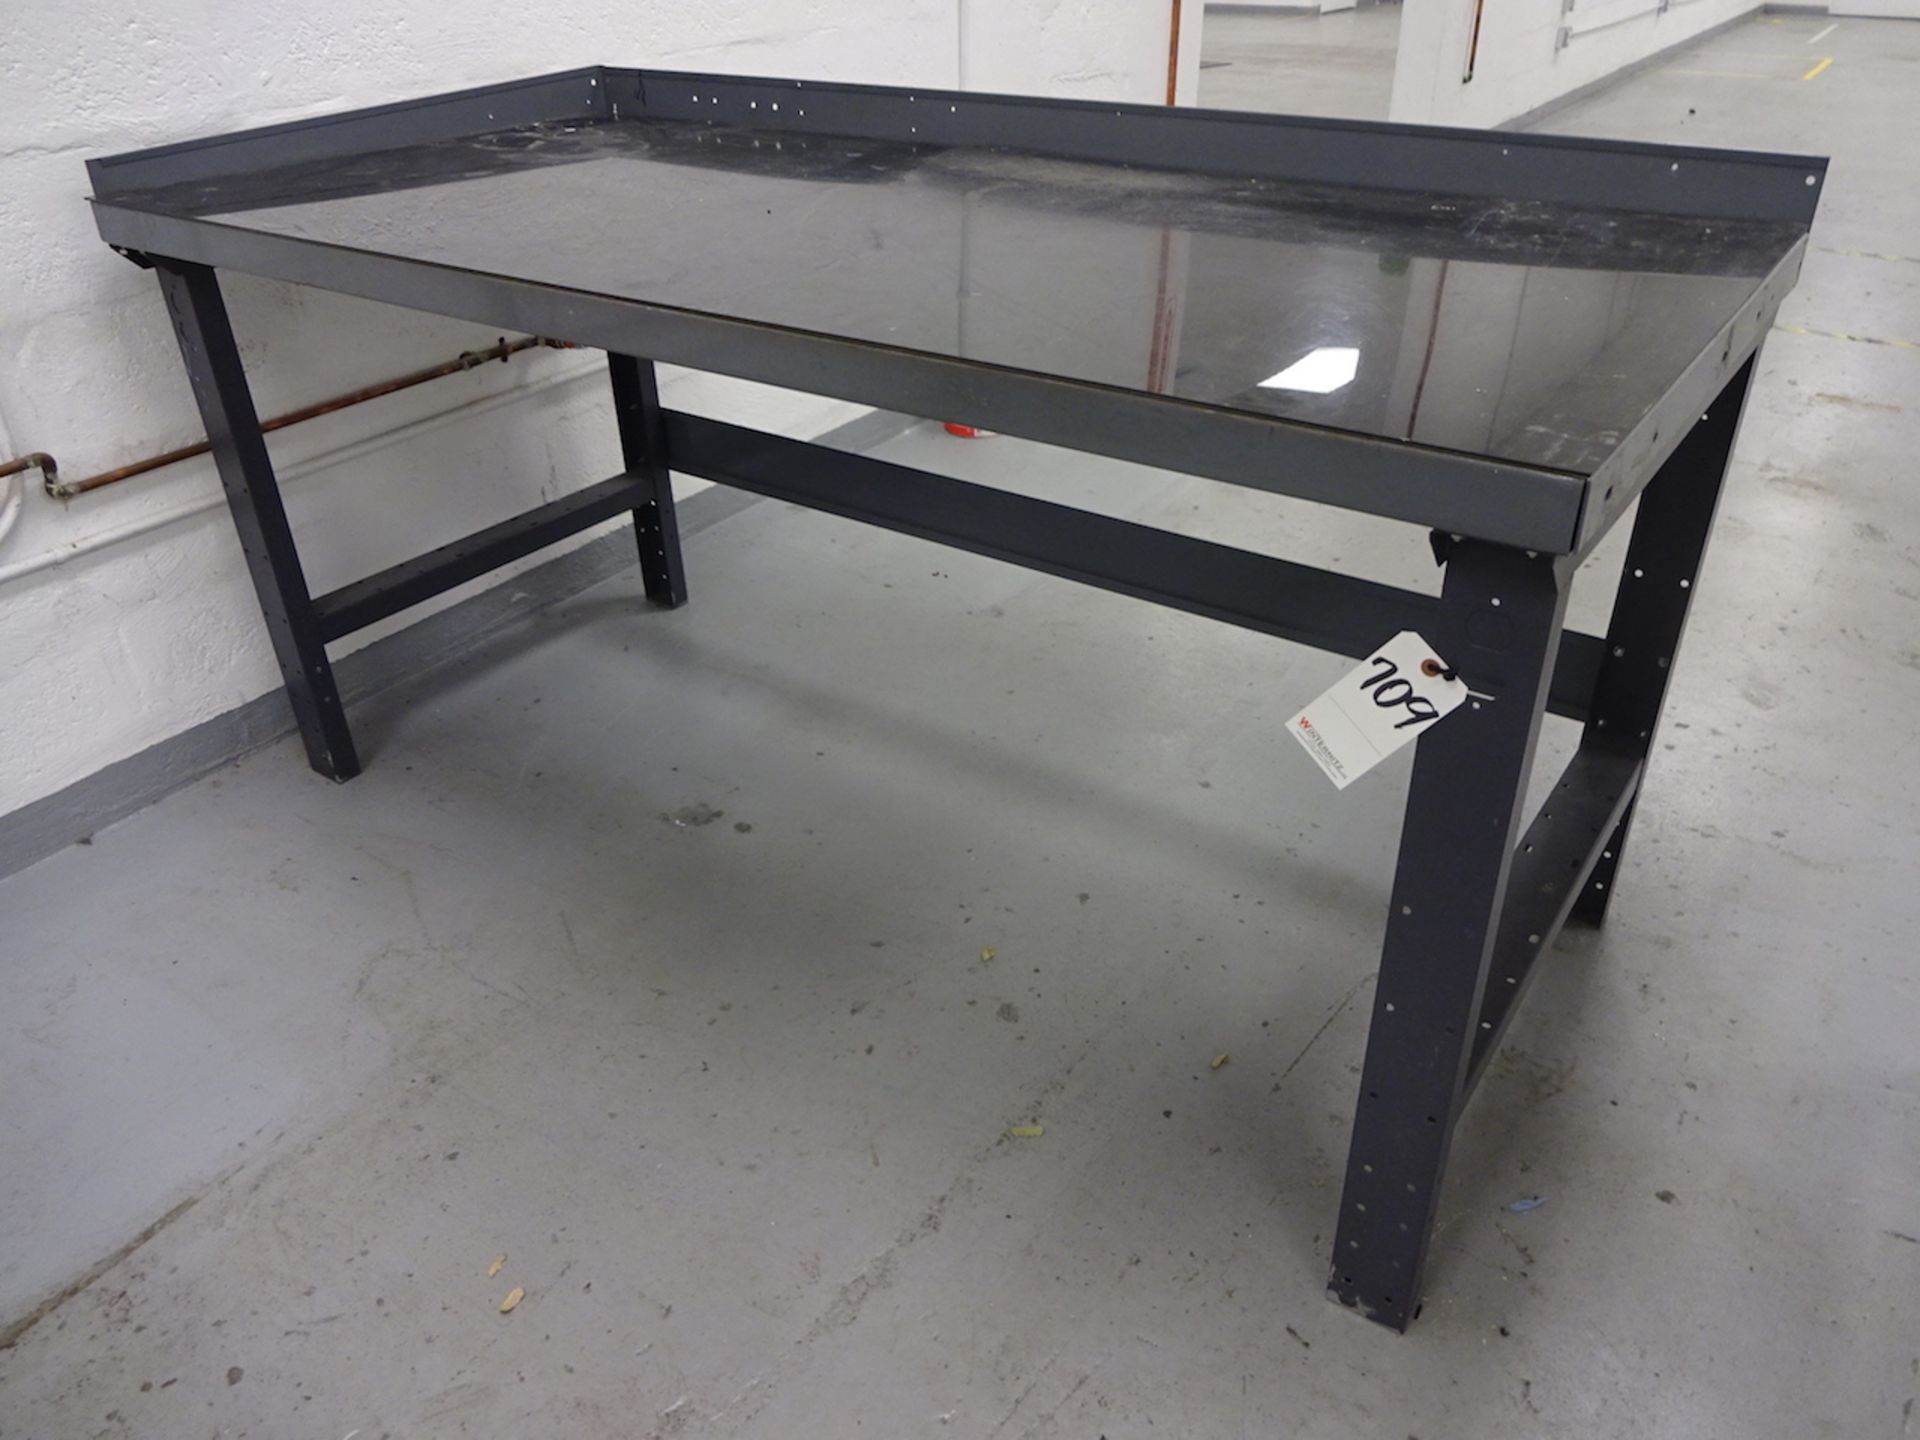 34" X 72" (APPROX.) STEEL WORK BENCH; Plastic Top Cover